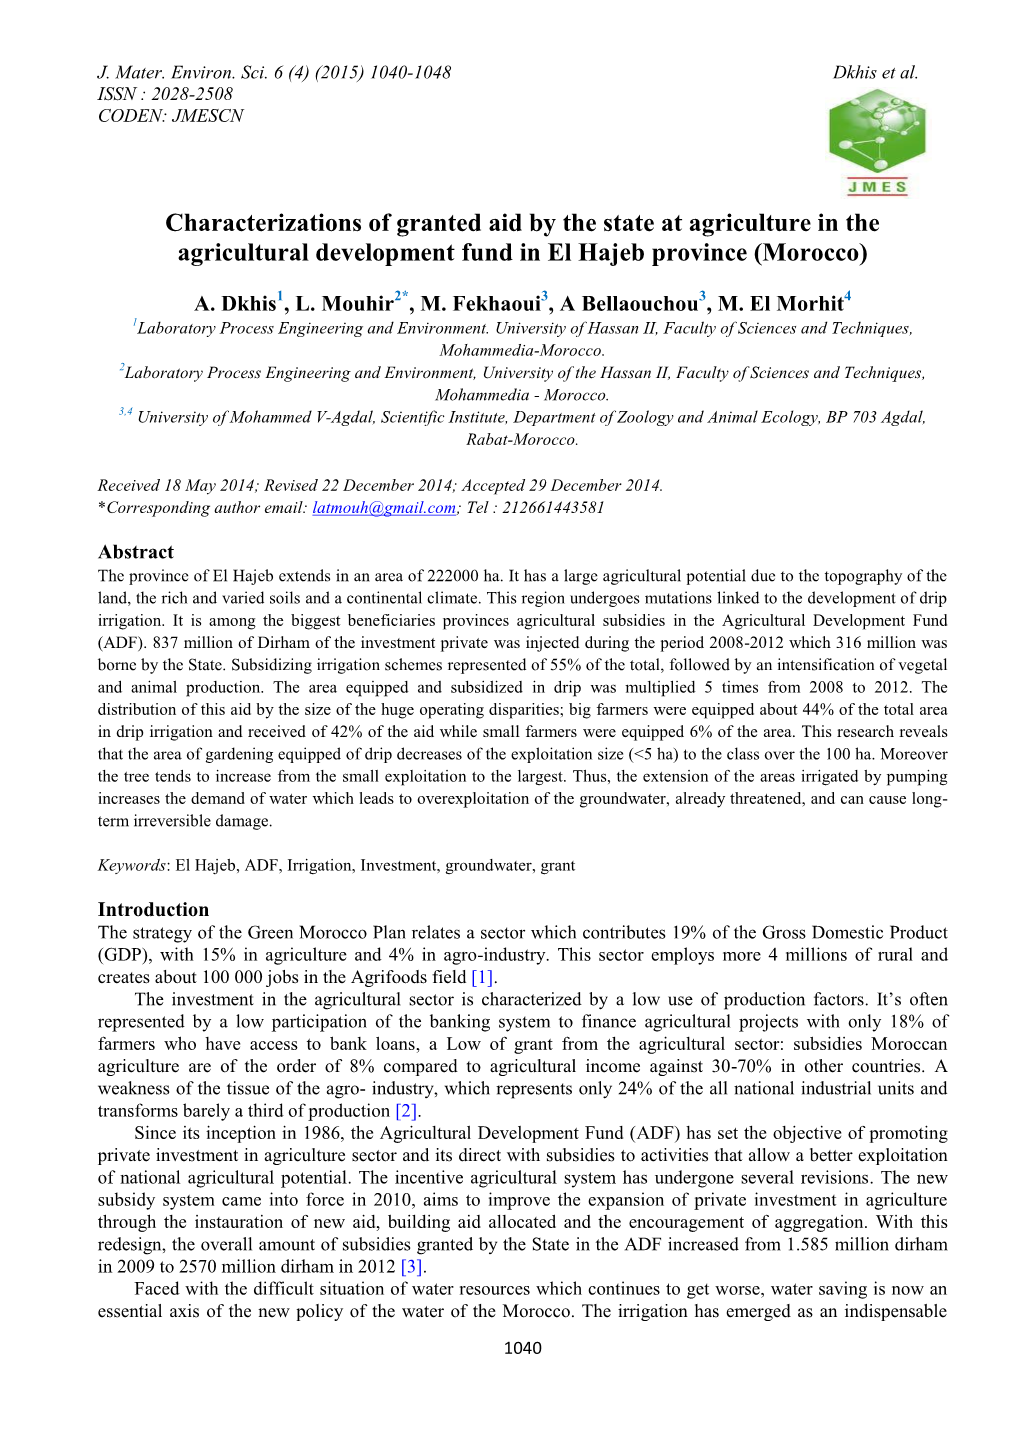 Characterizations of Granted Aid by the State at Agriculture in the Agricultural Development Fund in El Hajeb Province (Morocco)